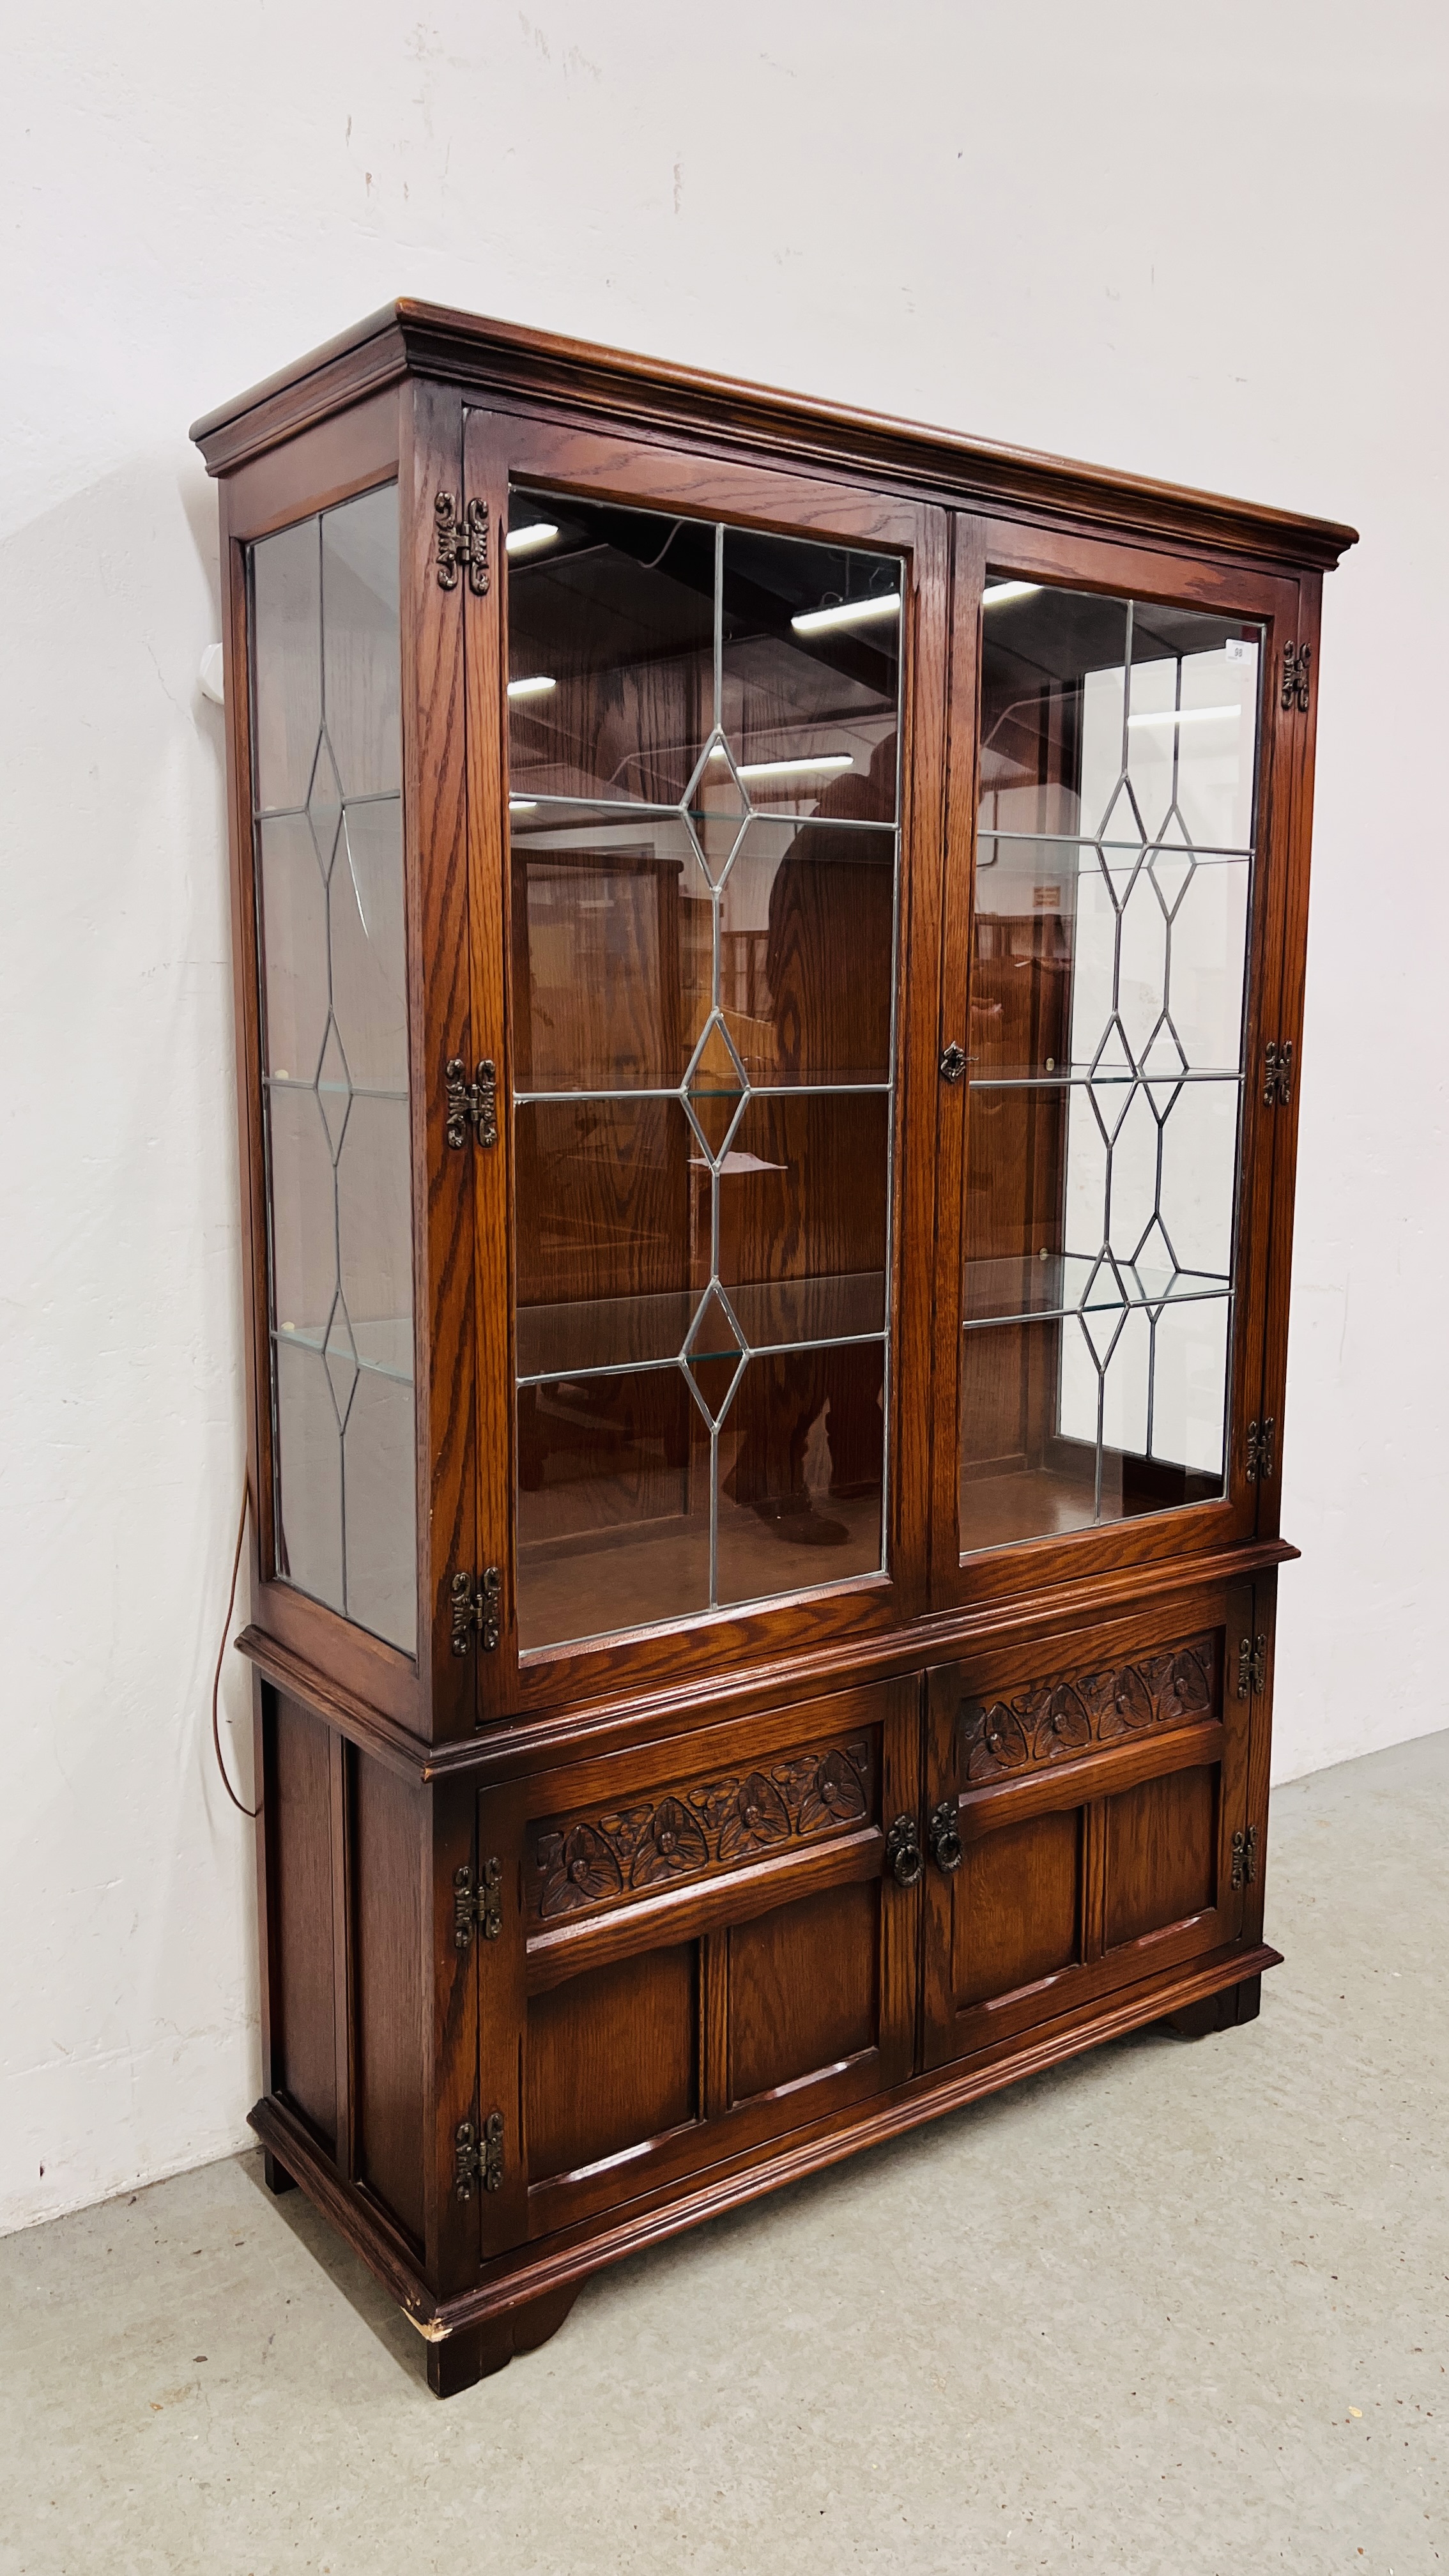 OLD CHARM DISPLAY CABINET WITH CUPBOARD BASE - W 108CM. D 38CM. H 162CM. - Image 2 of 7